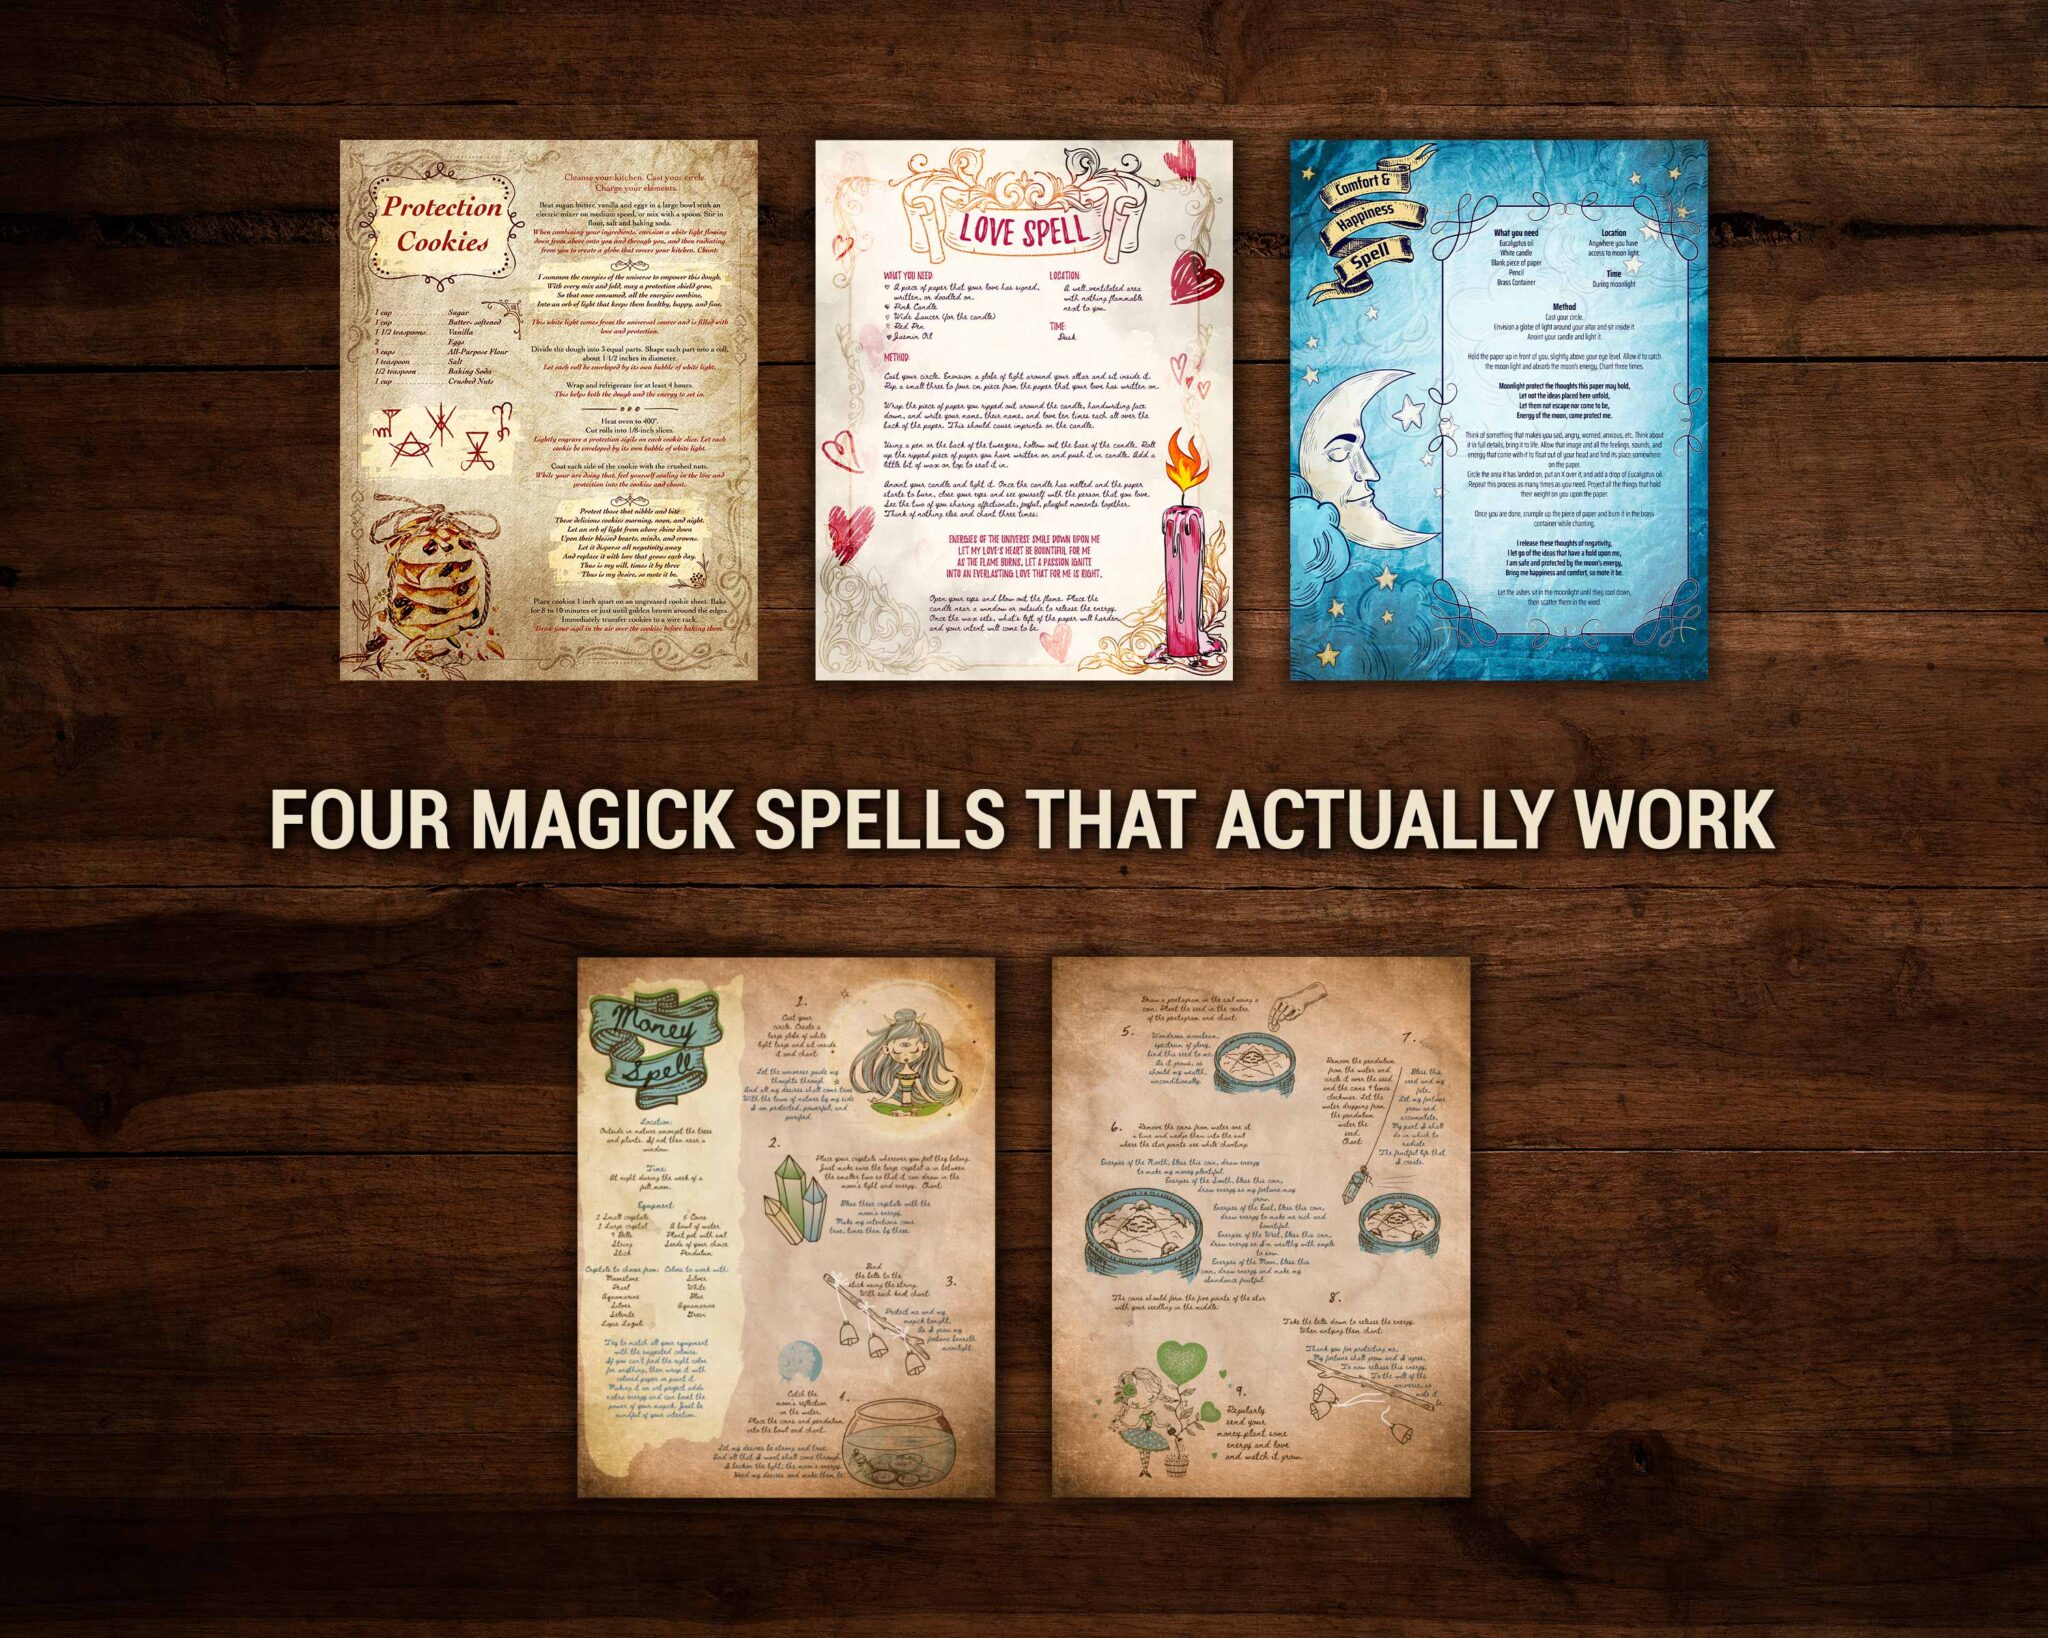 Four magick spells that really work. Each spell covers a different part of magic. Candle magick love spell, Kitchen Witchery Protection spell, visualization happiness spell, and a planting money tree spell.